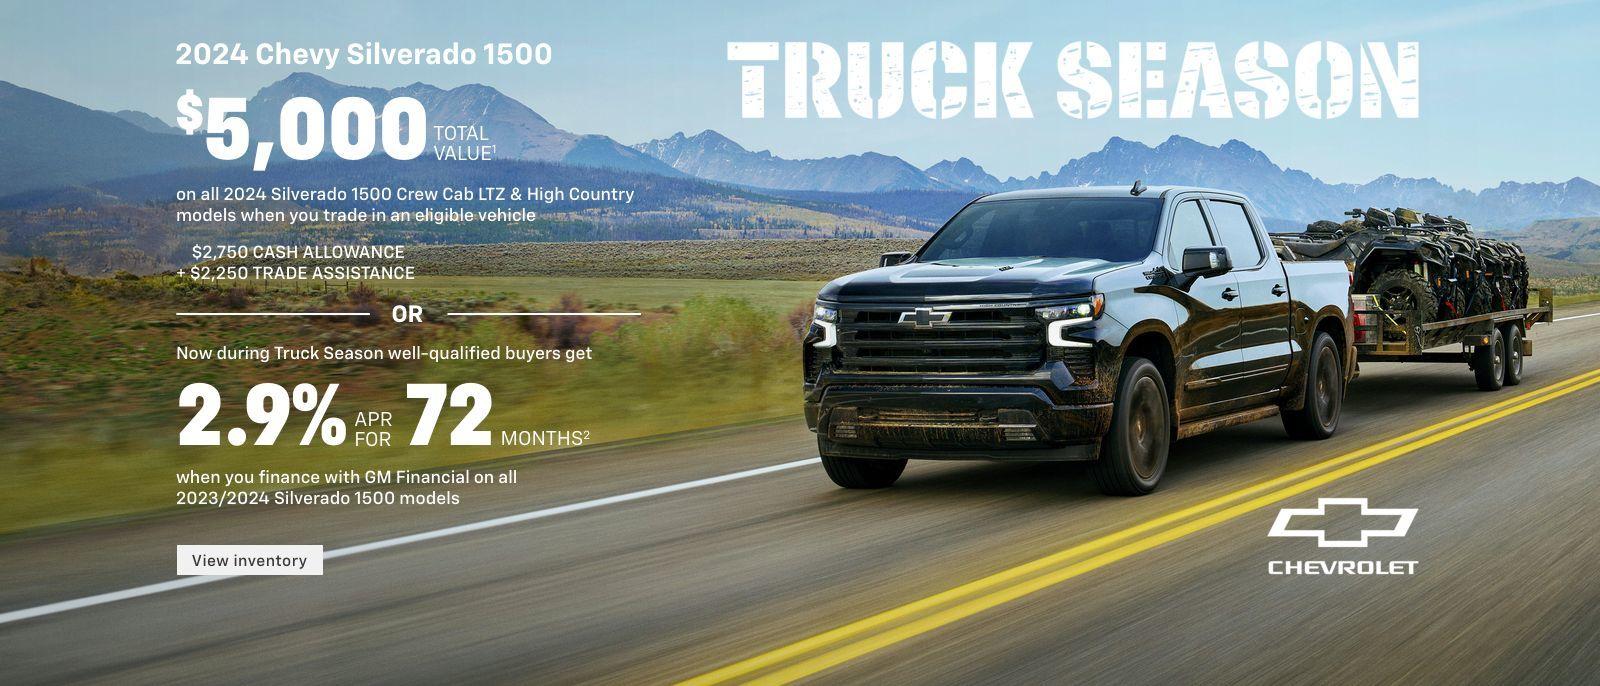 $5,000 total value on all 2024 Silverado 1500 Crew Cab LTZ & High Country models when you trade in an eligible vehicle. $2,750 Cash Allowance + $2,250 Trade Assistance. Or, now during Truck Season well-qualified buyers get 1.9% APR for 72 months when you finance with GM Financial on all 2023/2024 Silverado 1500 models.